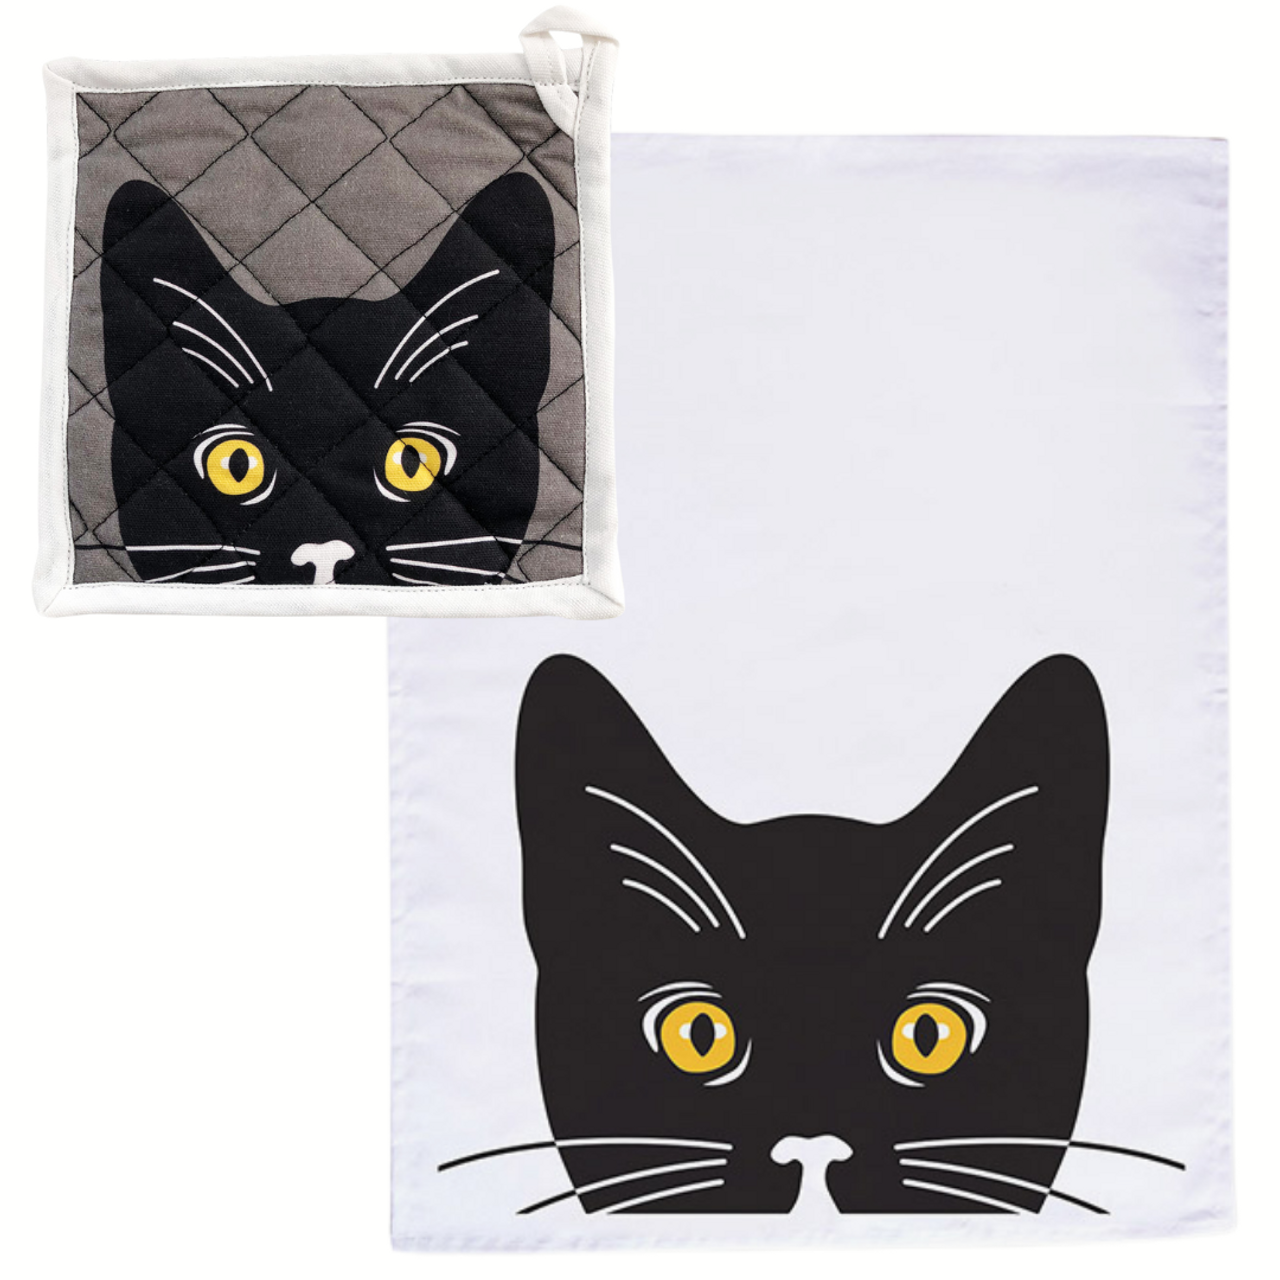 https://cdn11.bigcommerce.com/s-2xhgh/images/stencil/1280x1280/products/1401/3611/Black_Cat_Face_Oven_Mitt_and_Towel_Set__05242.1646528482.png?c=2